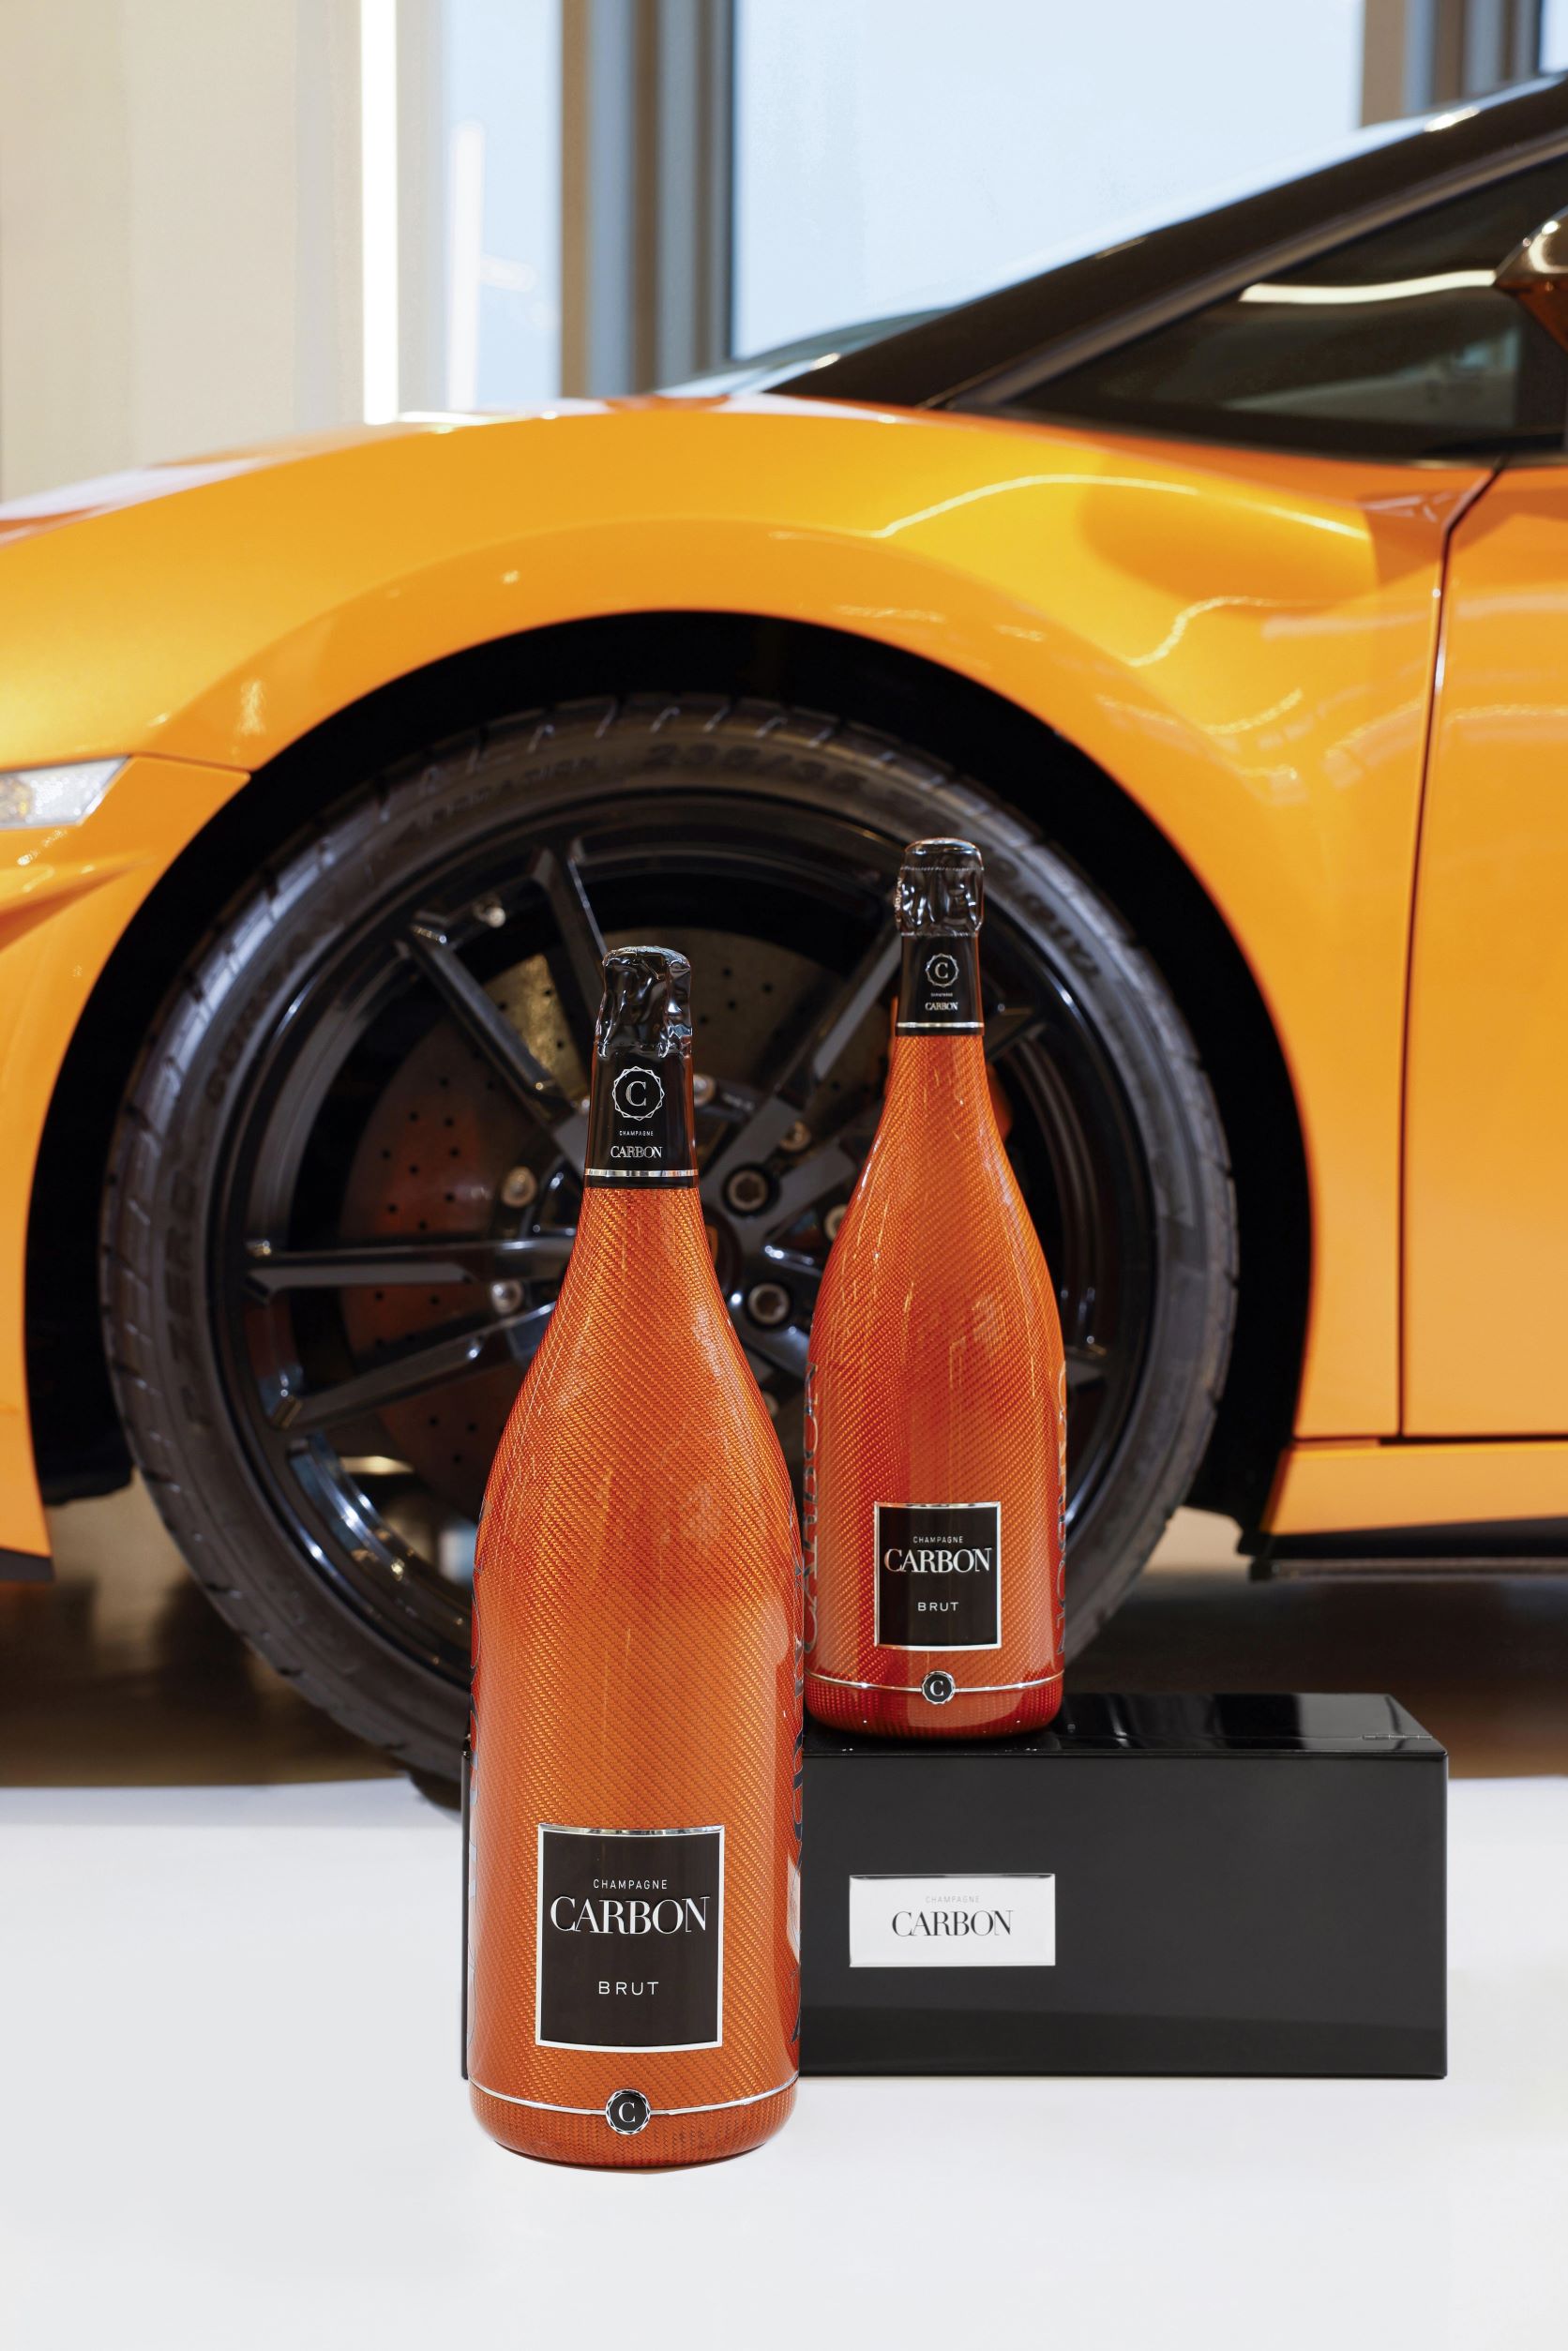 Two orange bottles of Champagne Carbon presented in front of a similar coloured Lamborghini supercar